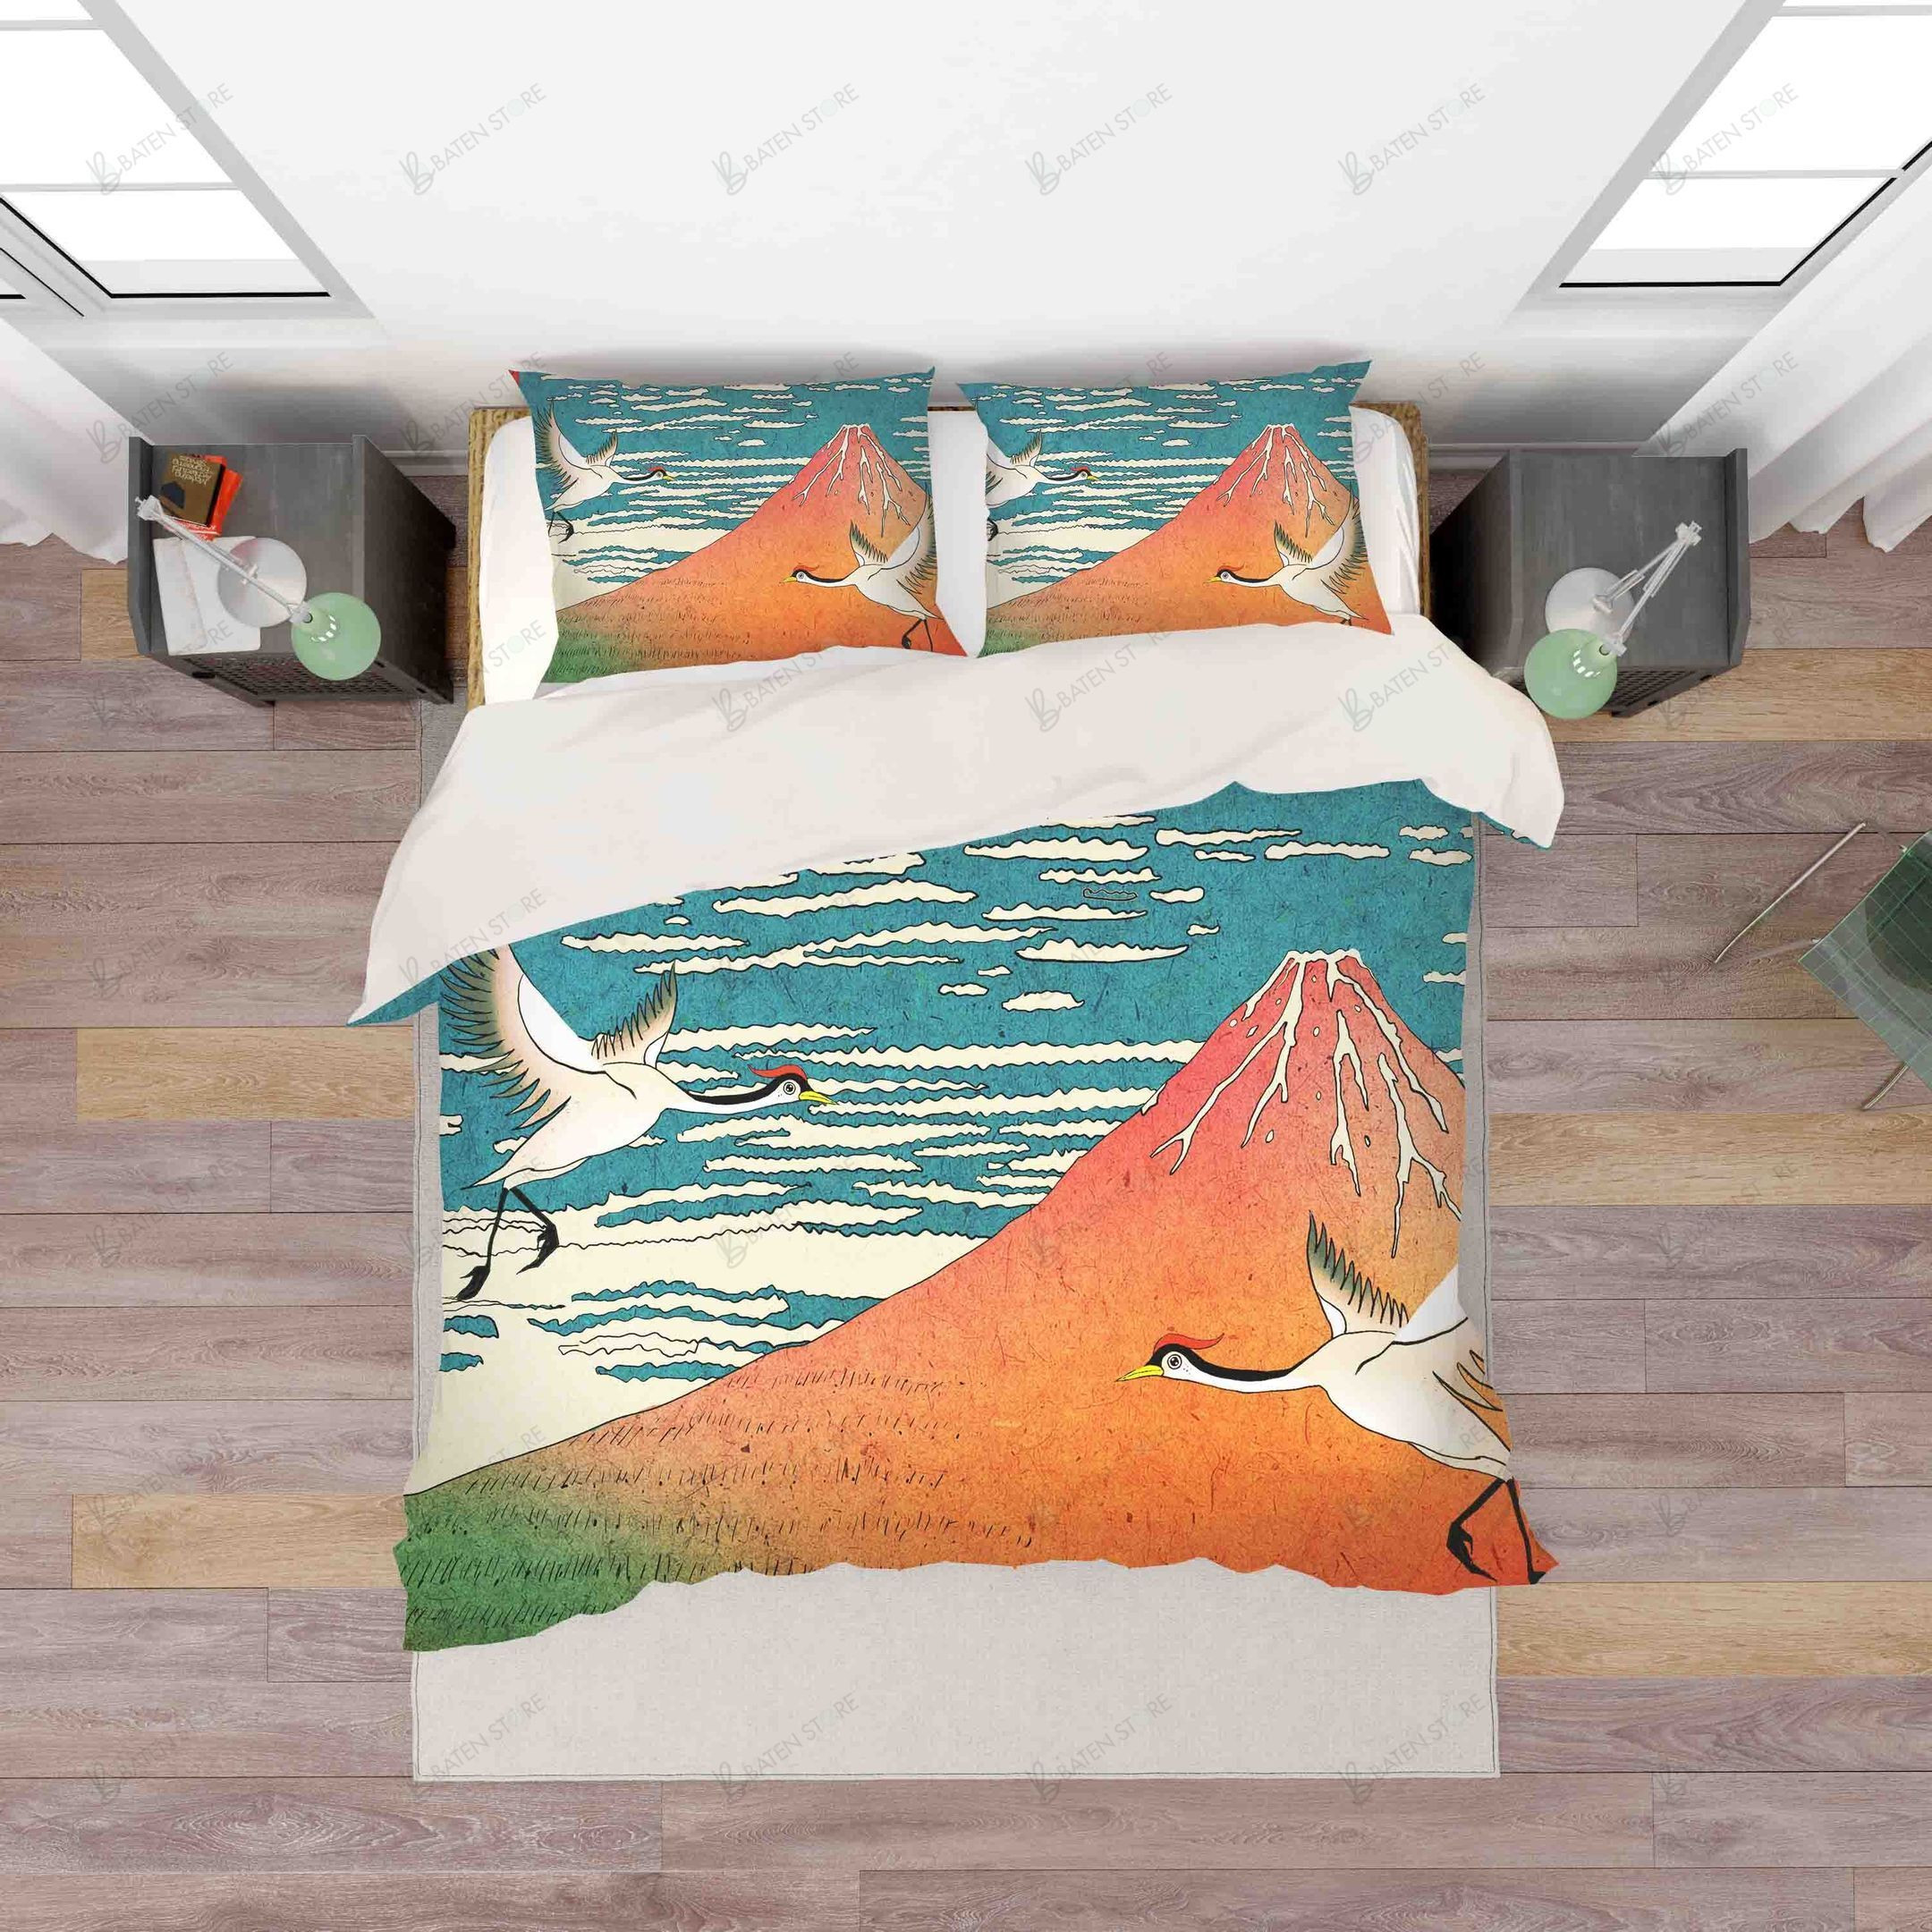 white crane sea bed sheets duvet cover bedding set ideal presents for birthday christmas thanksgiving 33iwz